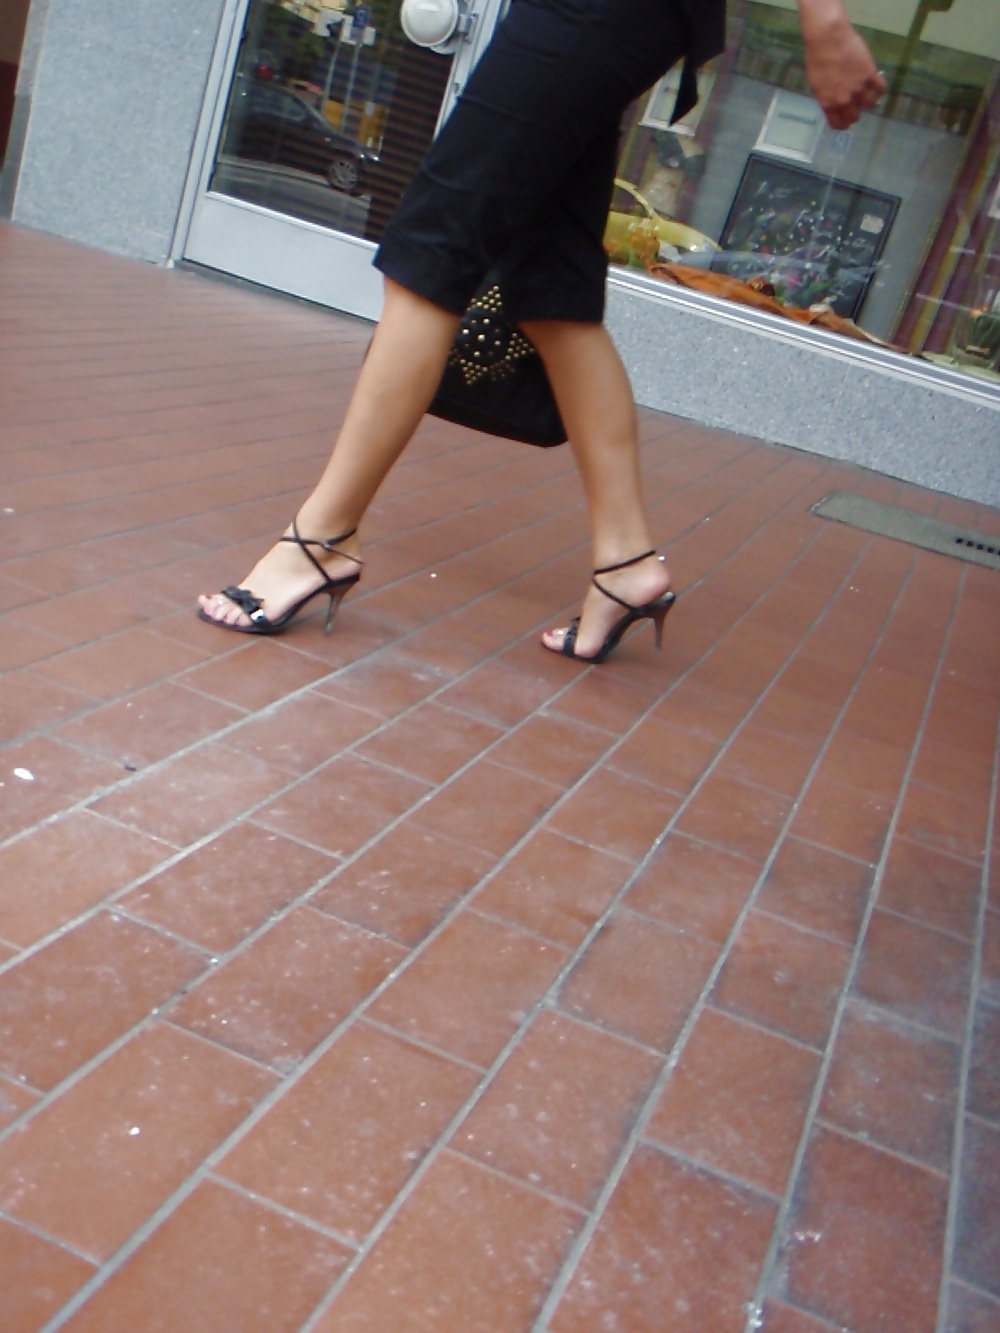 HH-Enthusiasts High heel babes on the boulevard! Any myth?